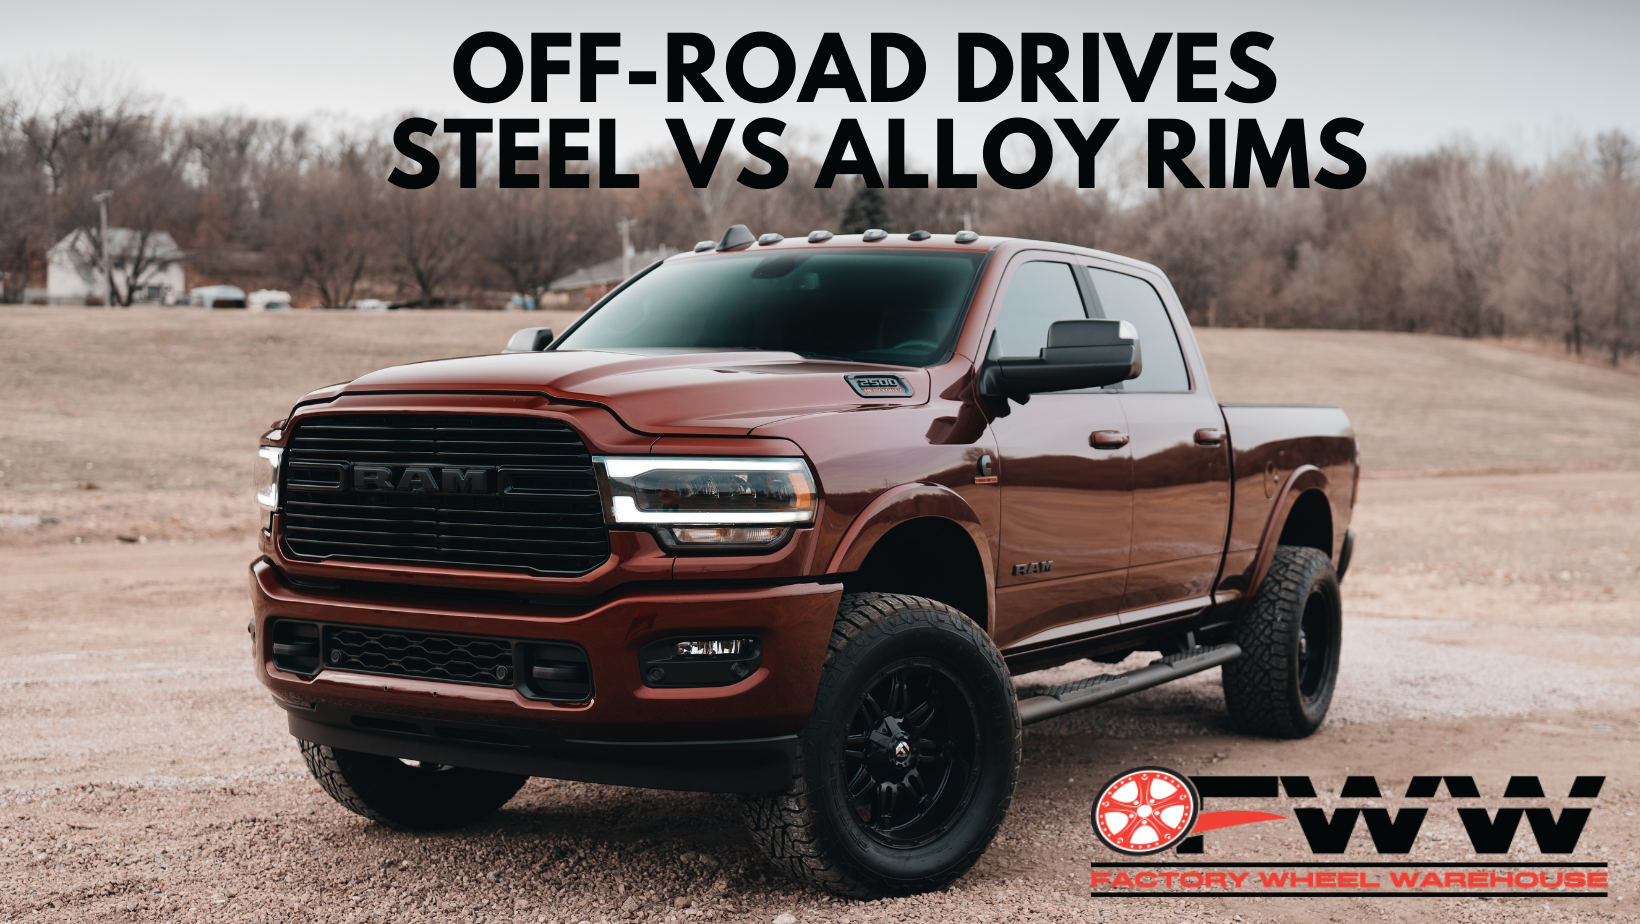 Choosing Off road wheels made safer for you: Steel Rims vs Alloy Rims